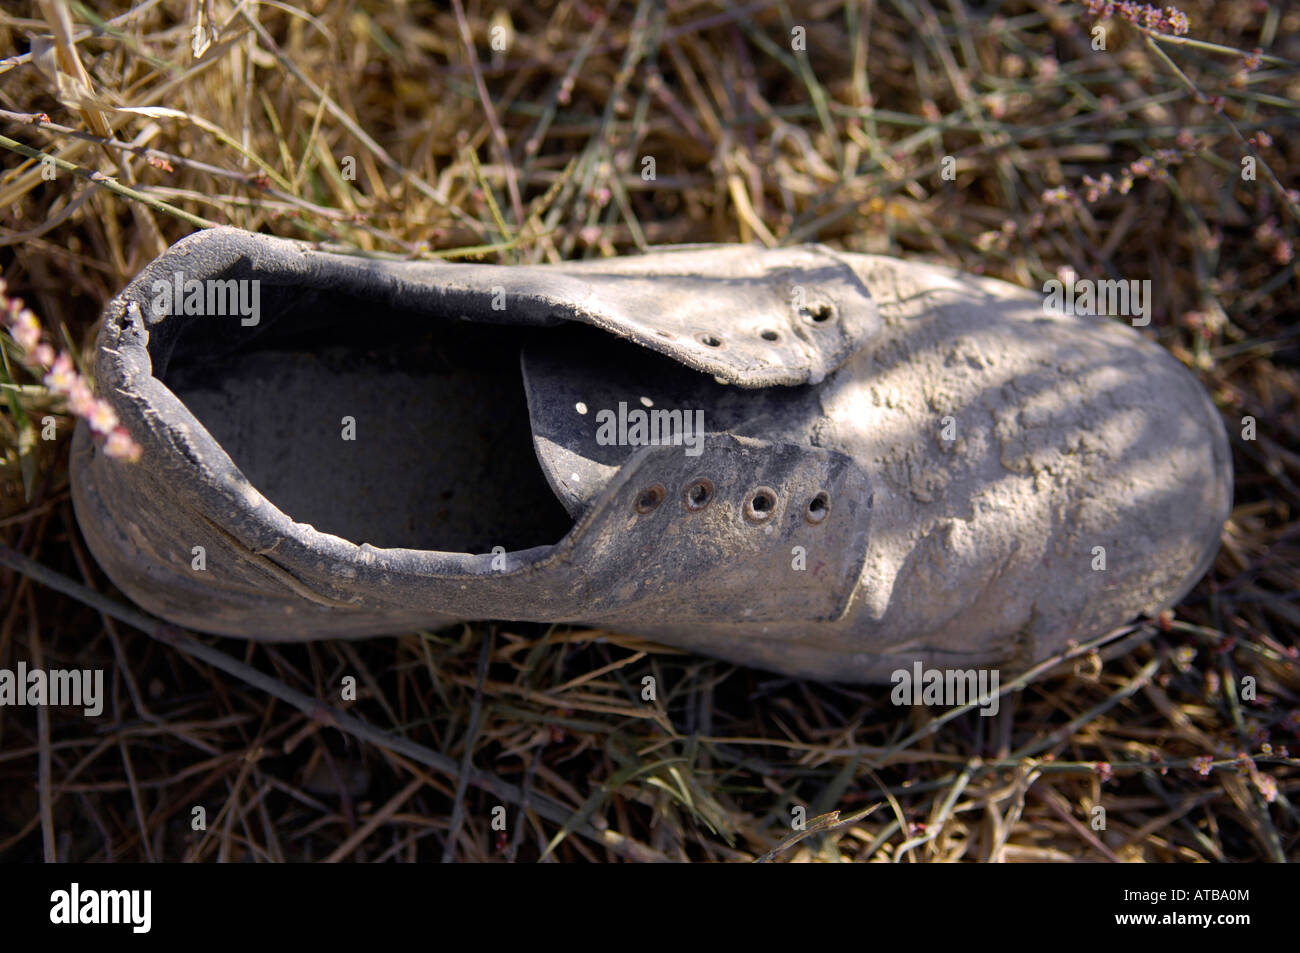 discarded old shoe cyprus abandoned one solitary no laces lost sunlight grassland arid dry Stock Photo